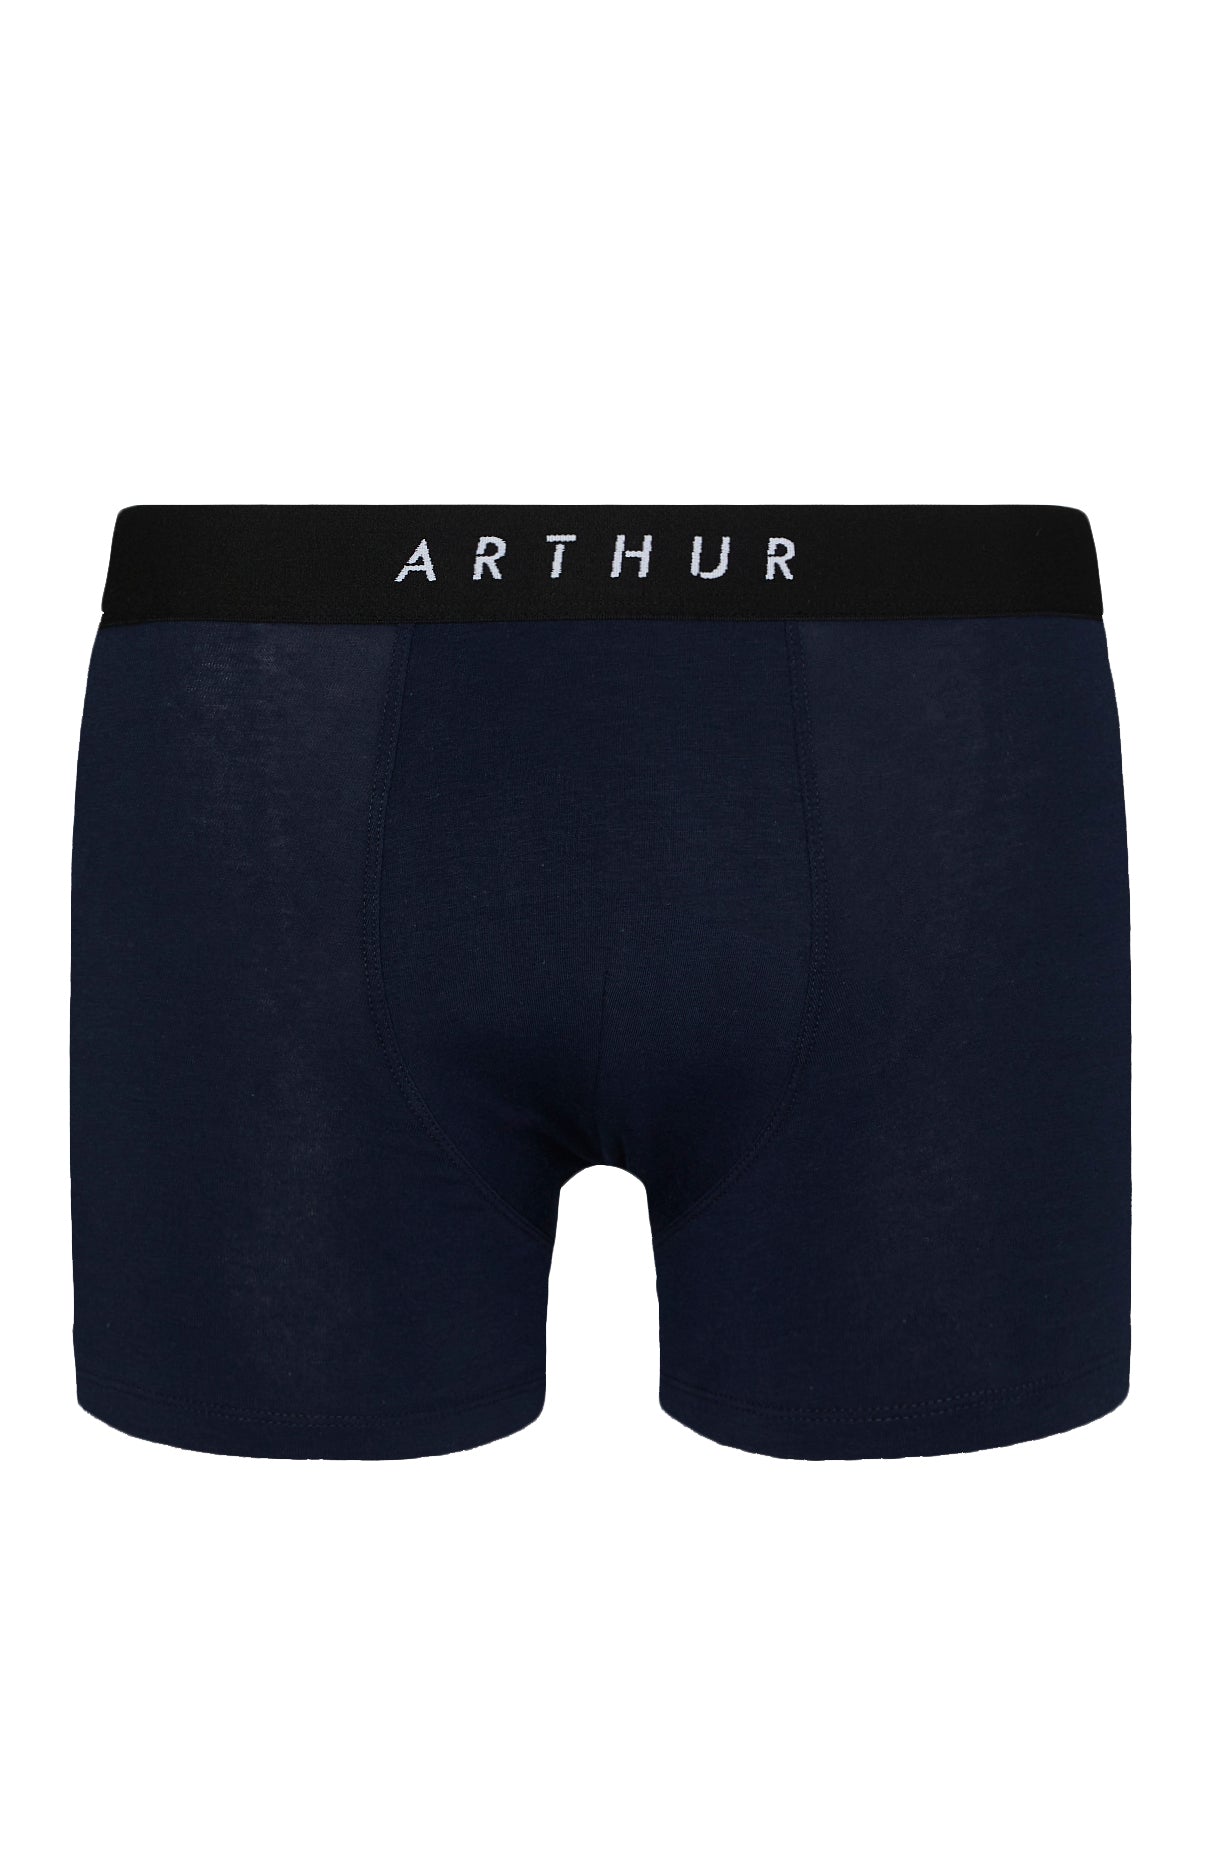 Boxer short Navy - Traditional